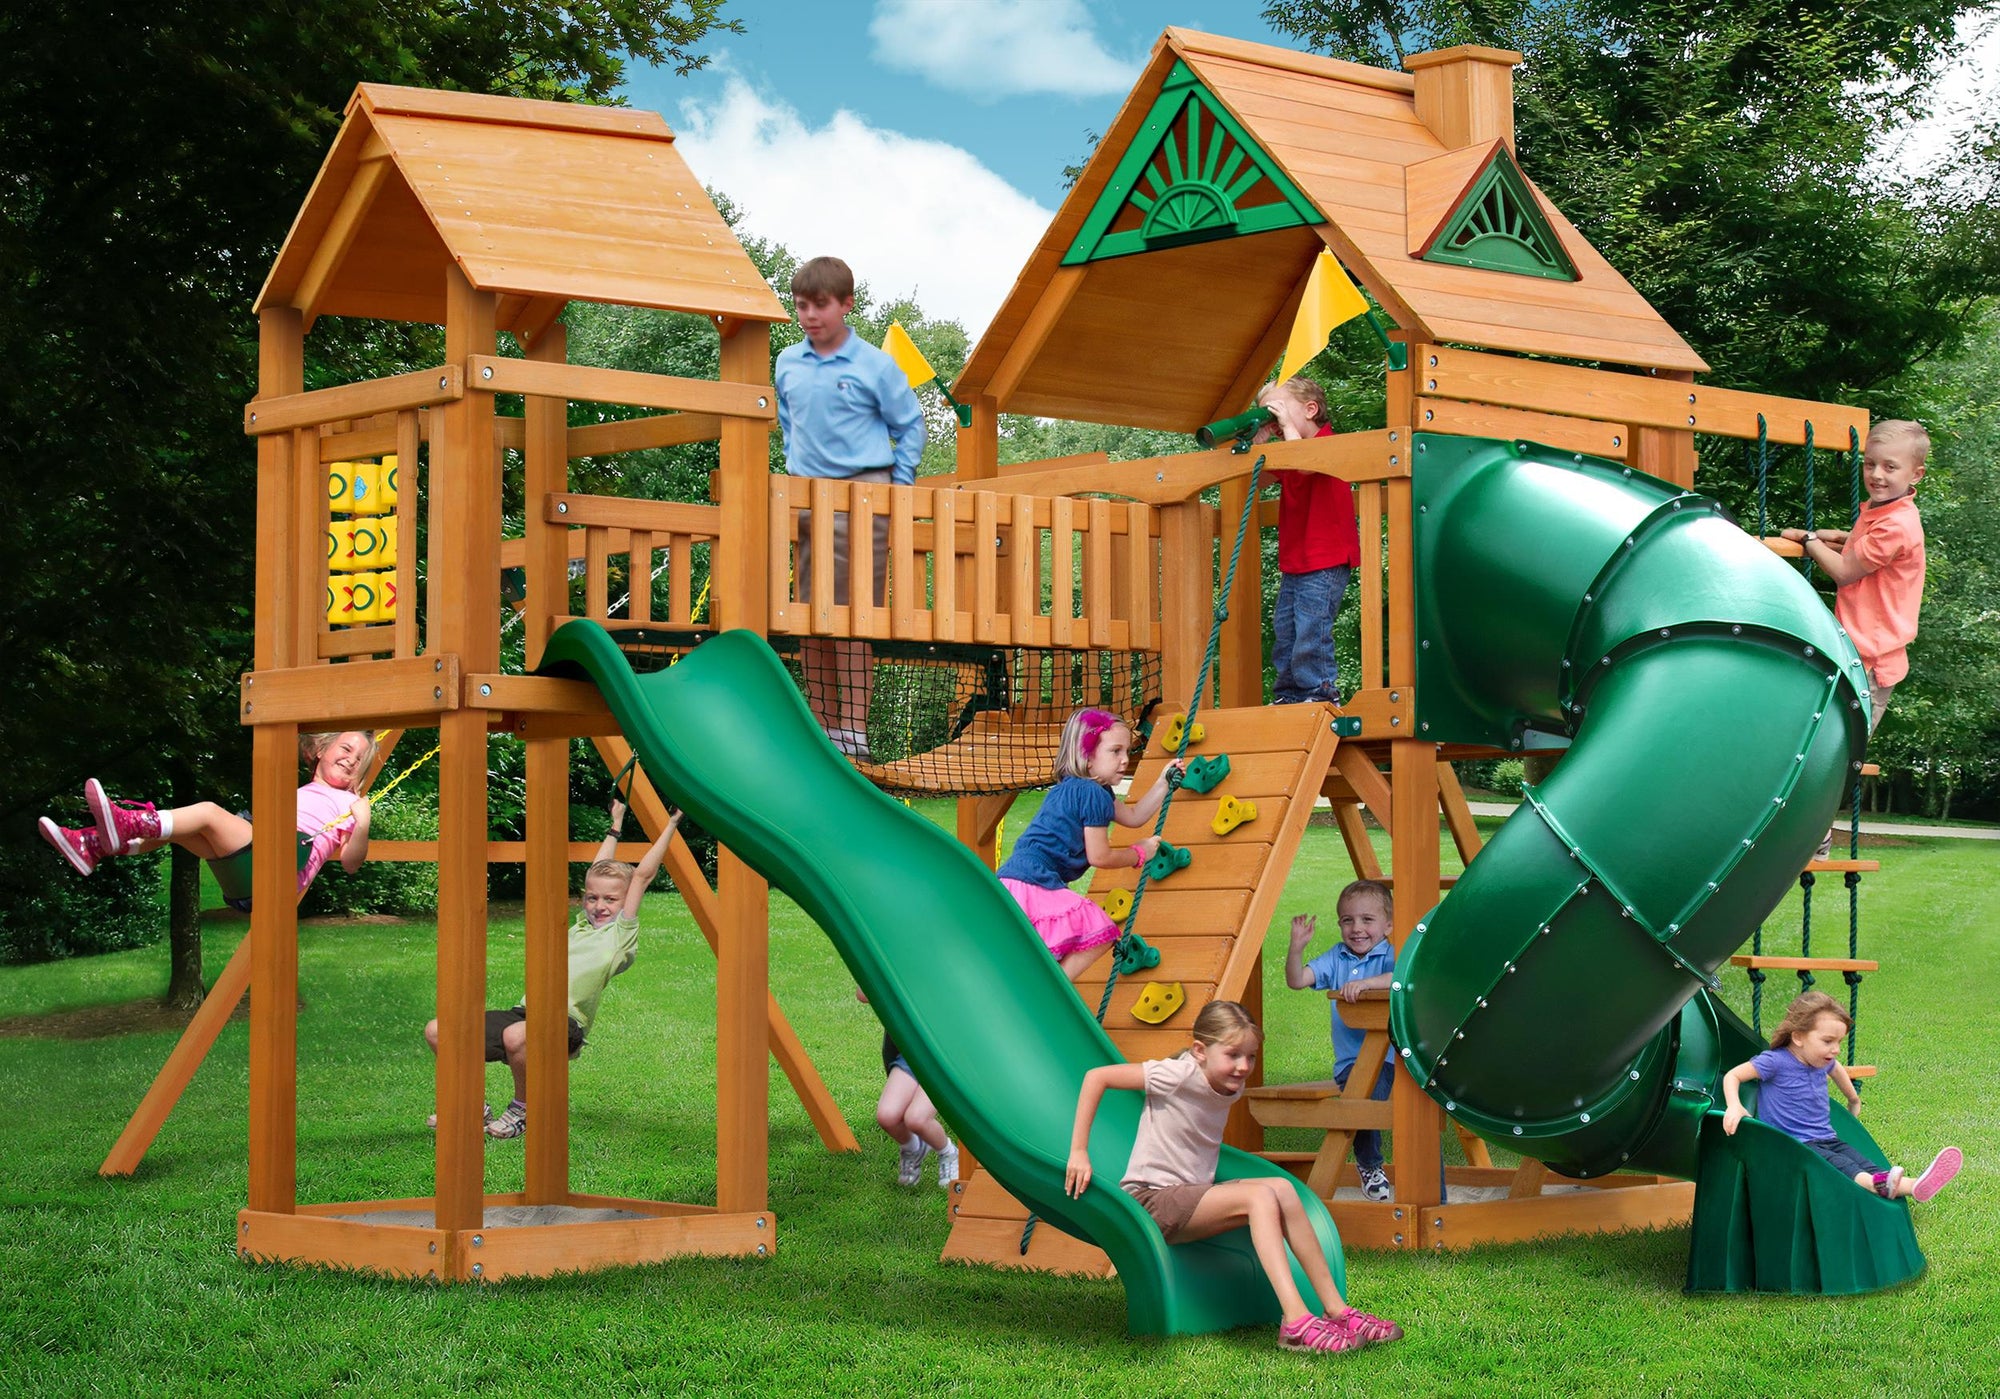 wooden playsets installation included